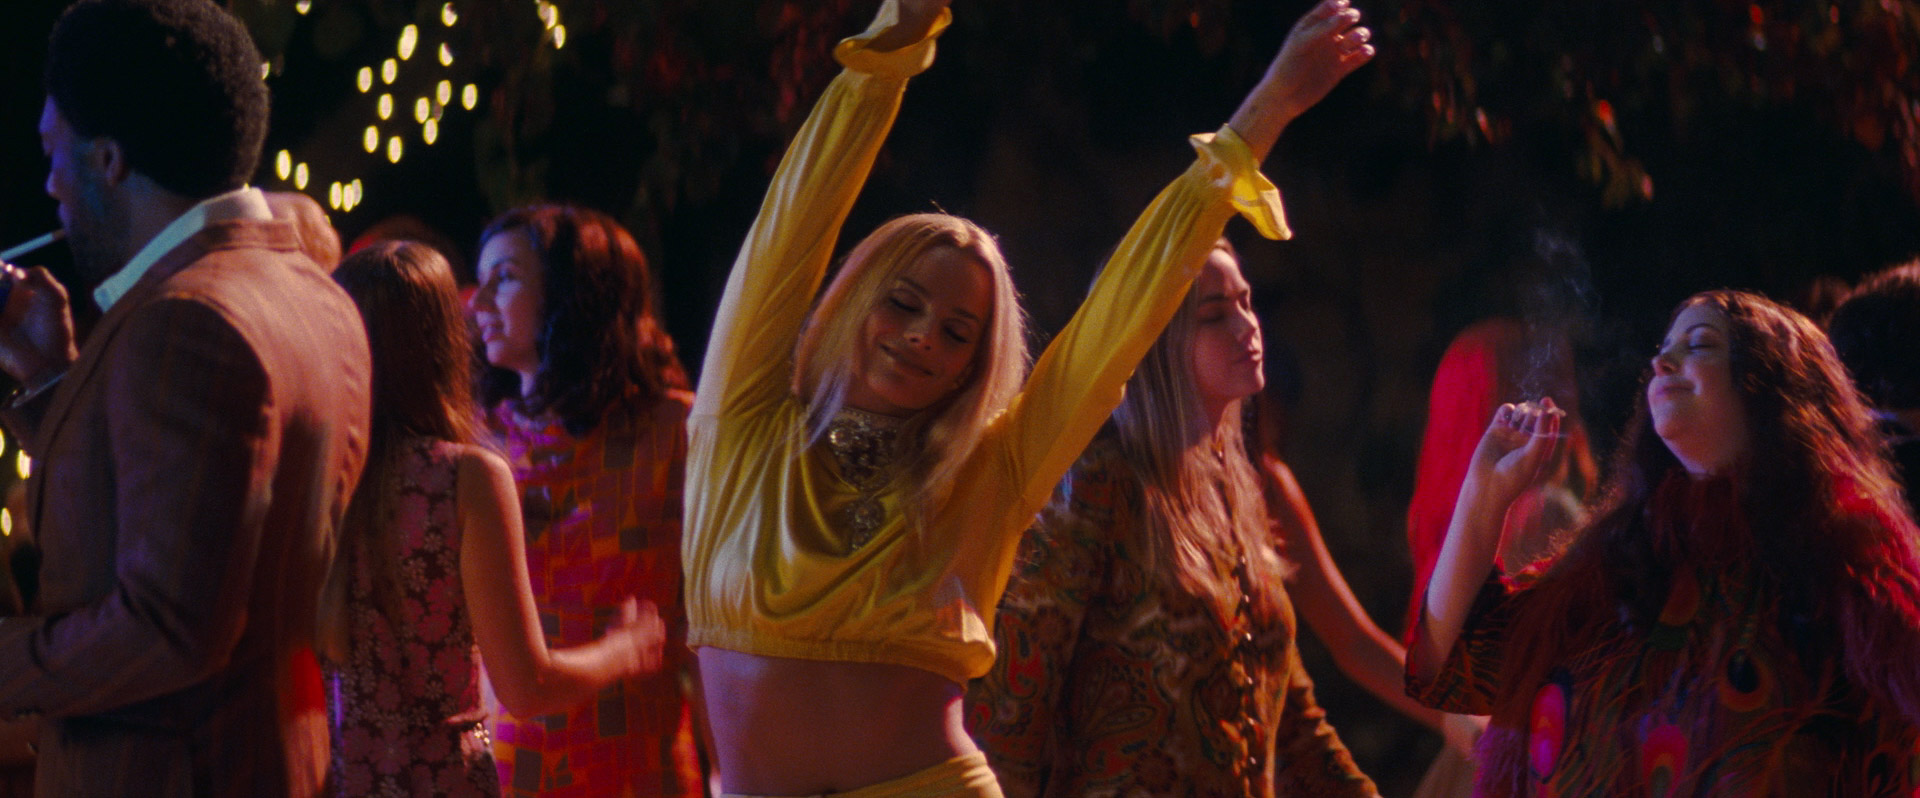 Margot Robbie in Once Upon a Time… in Hollywood